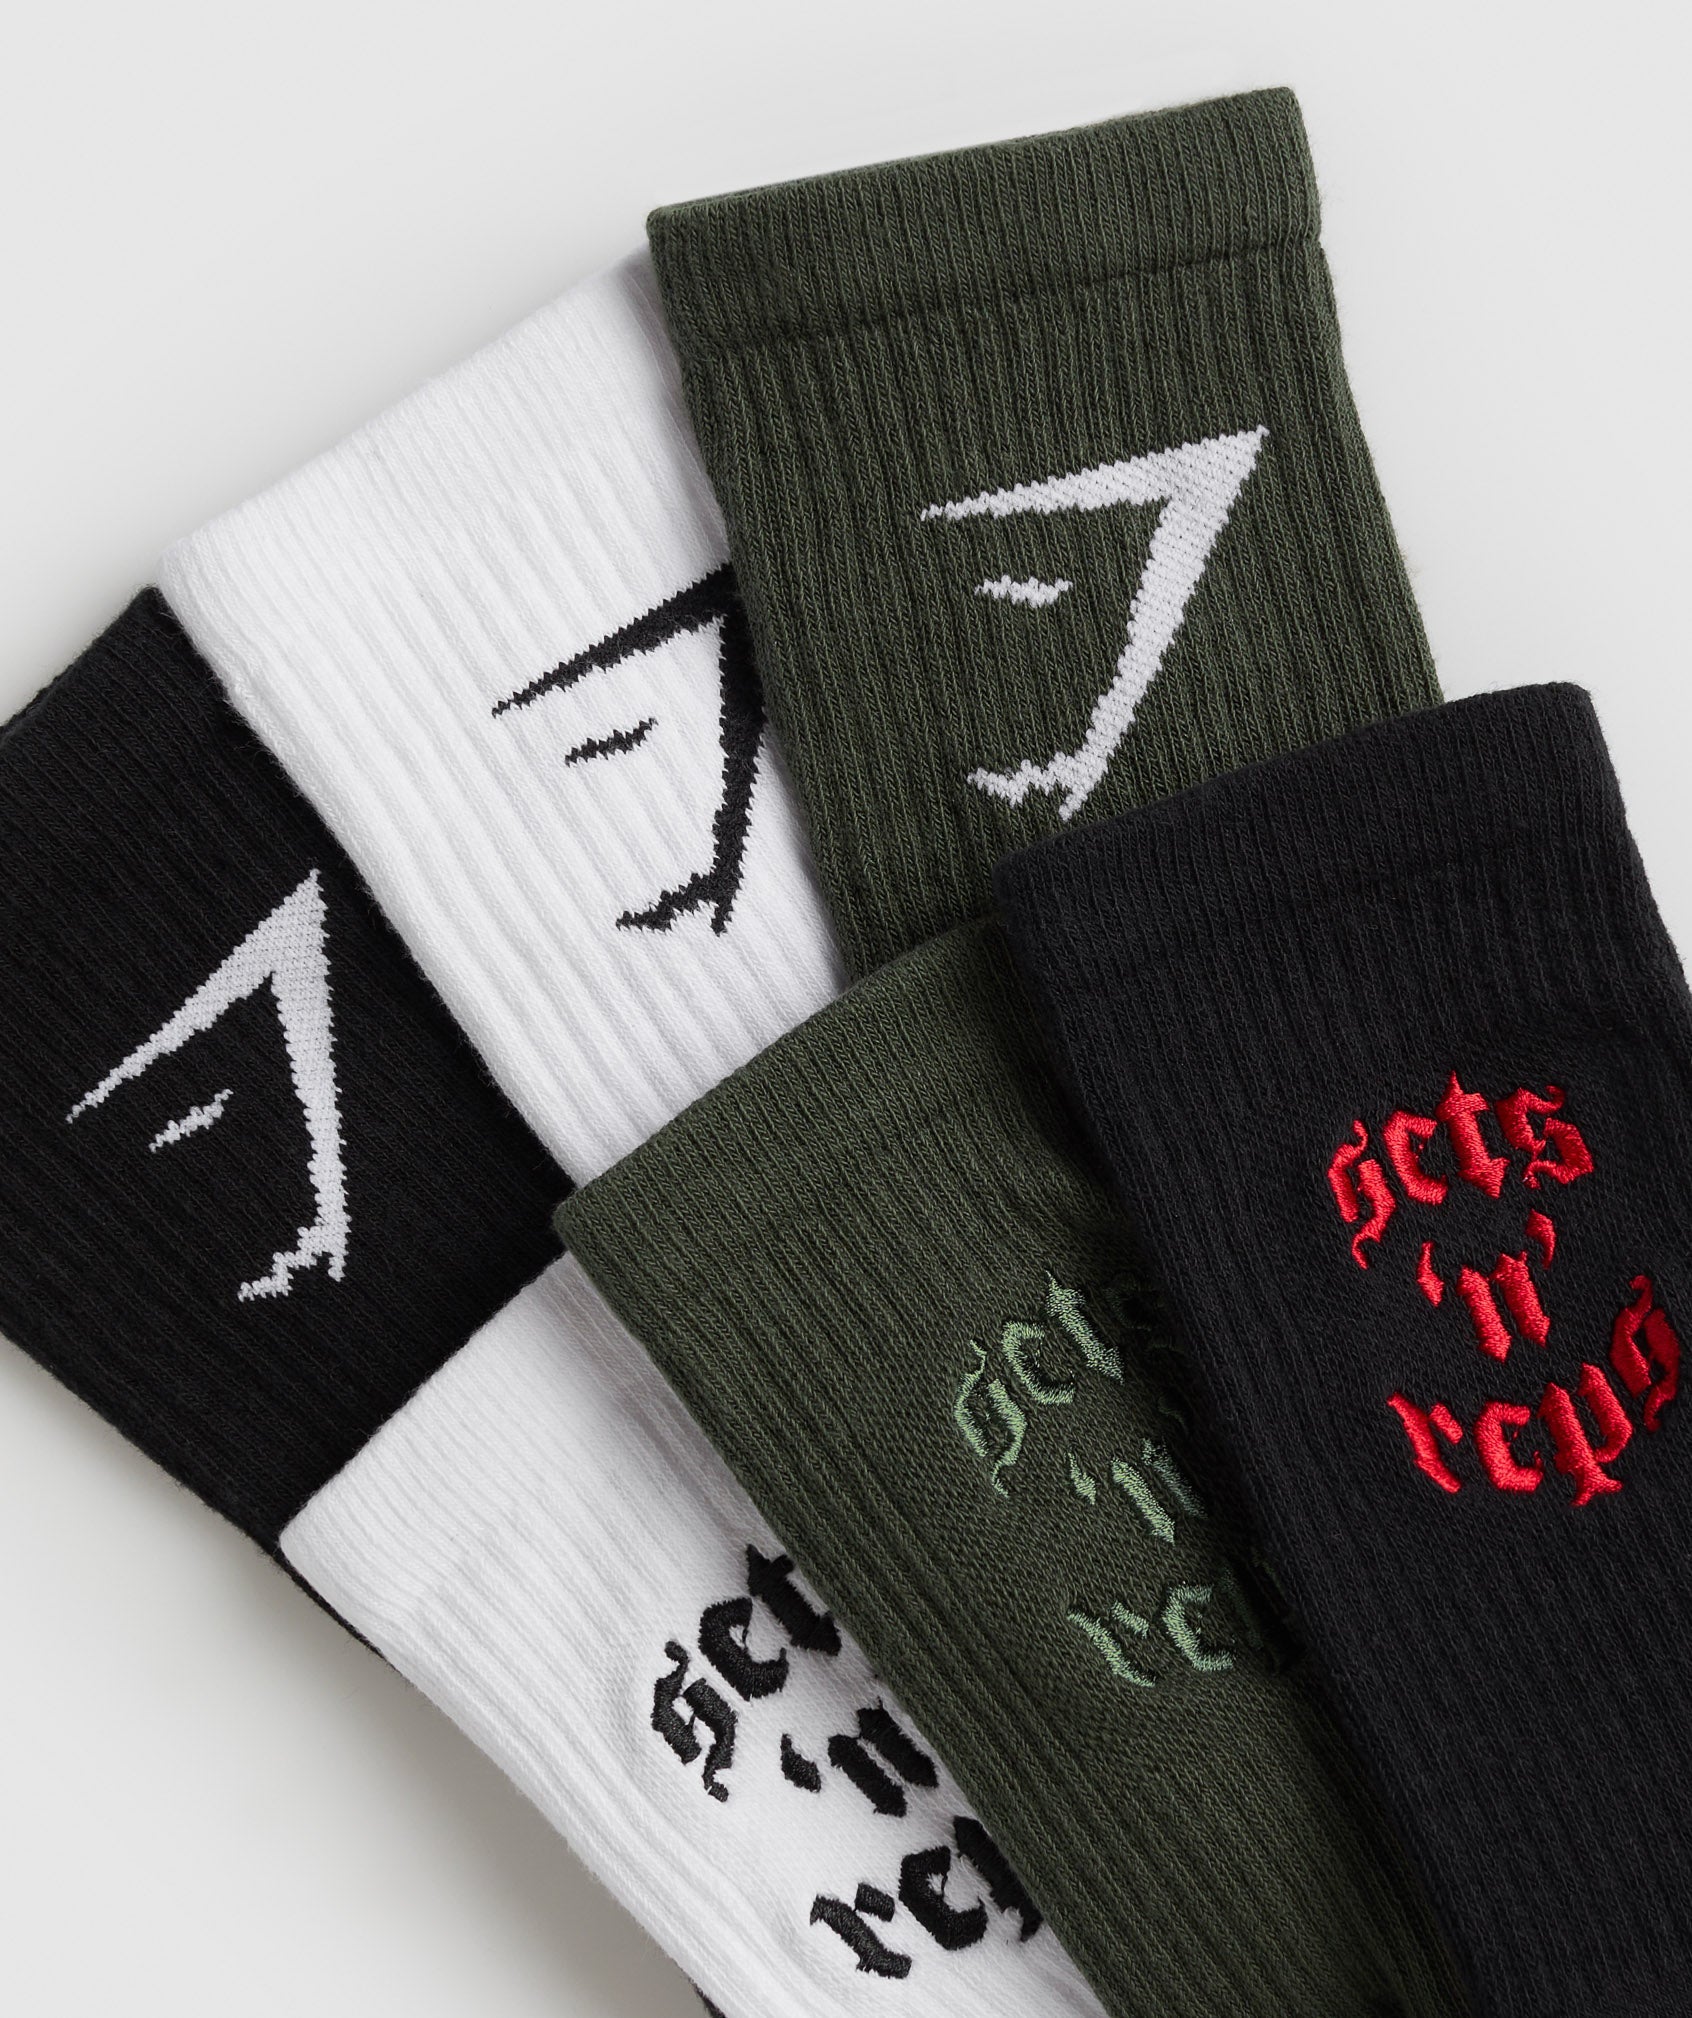 Sets and Reps 3pk Crew Socks in White/Winter Olive/Black - view 2